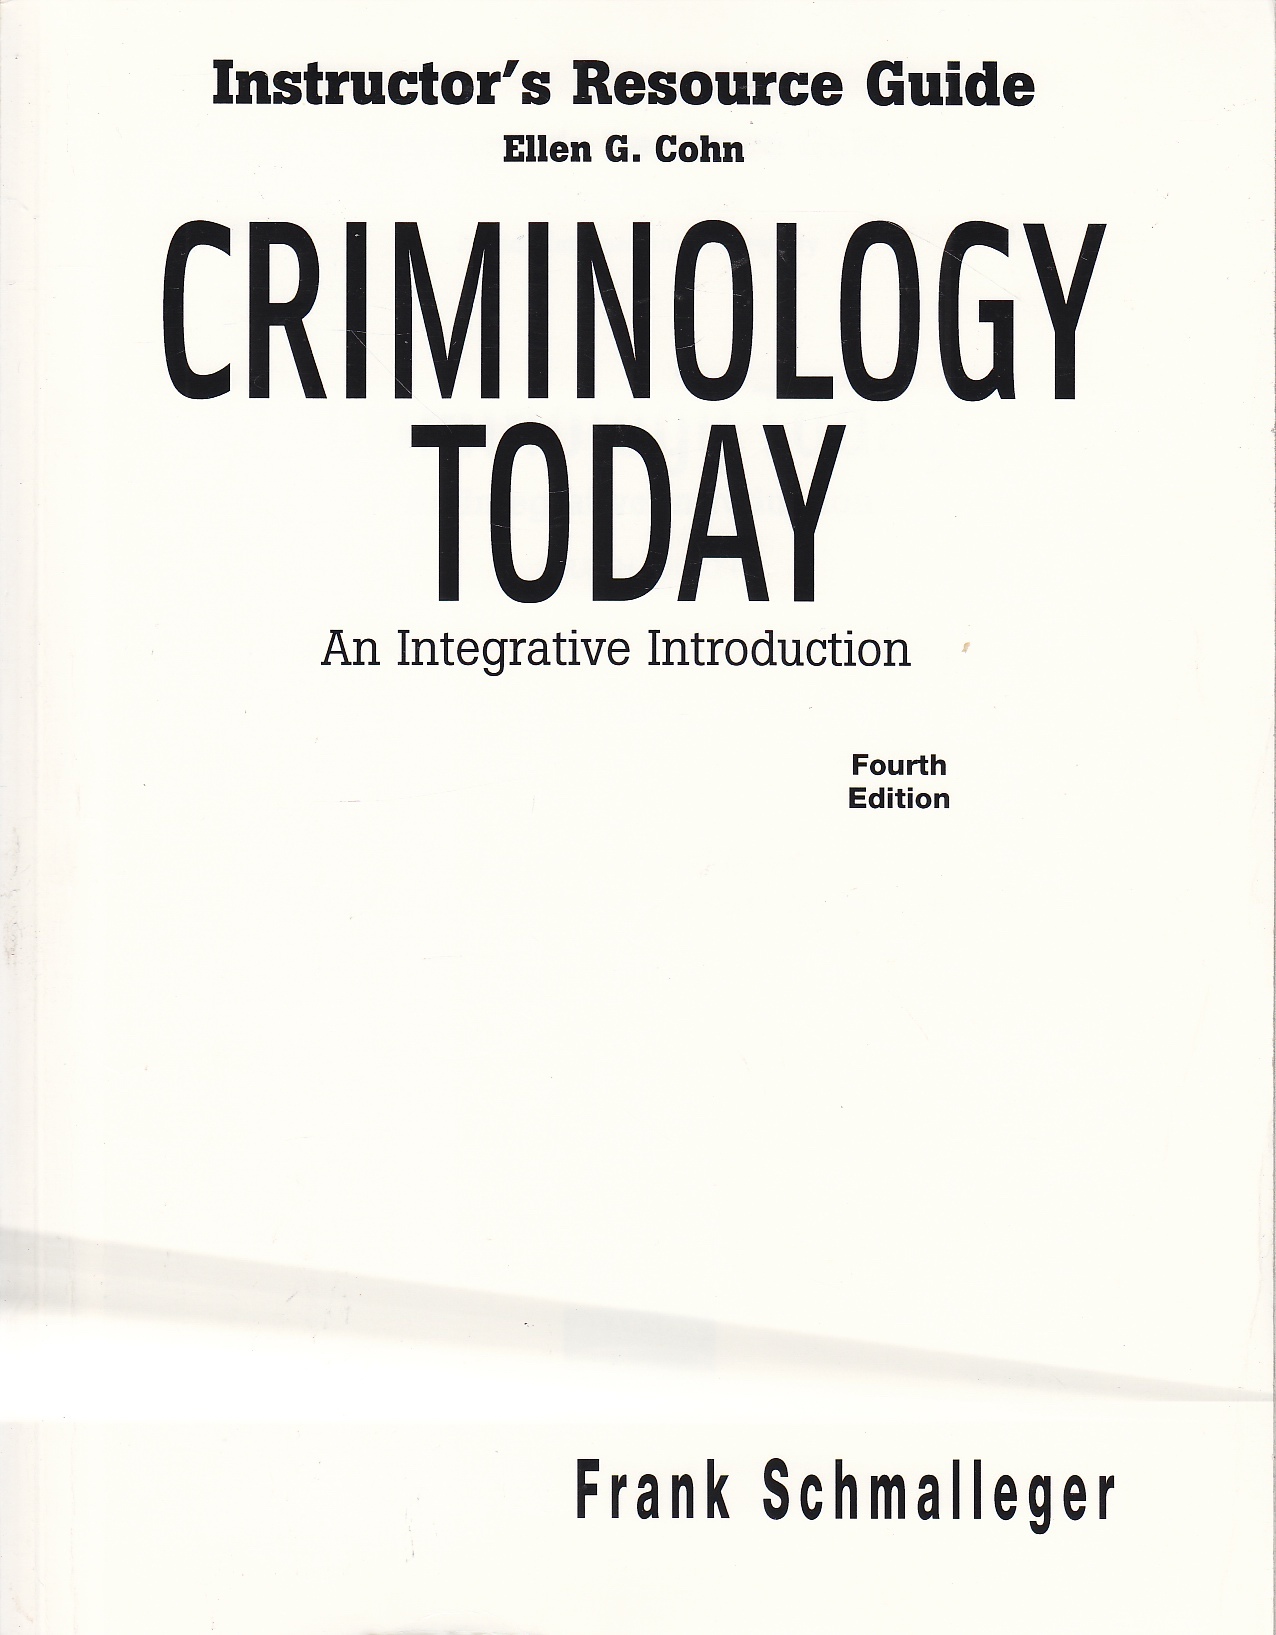 Image for Instructor's Resource Guide Criminology Today An Integrative Introduction